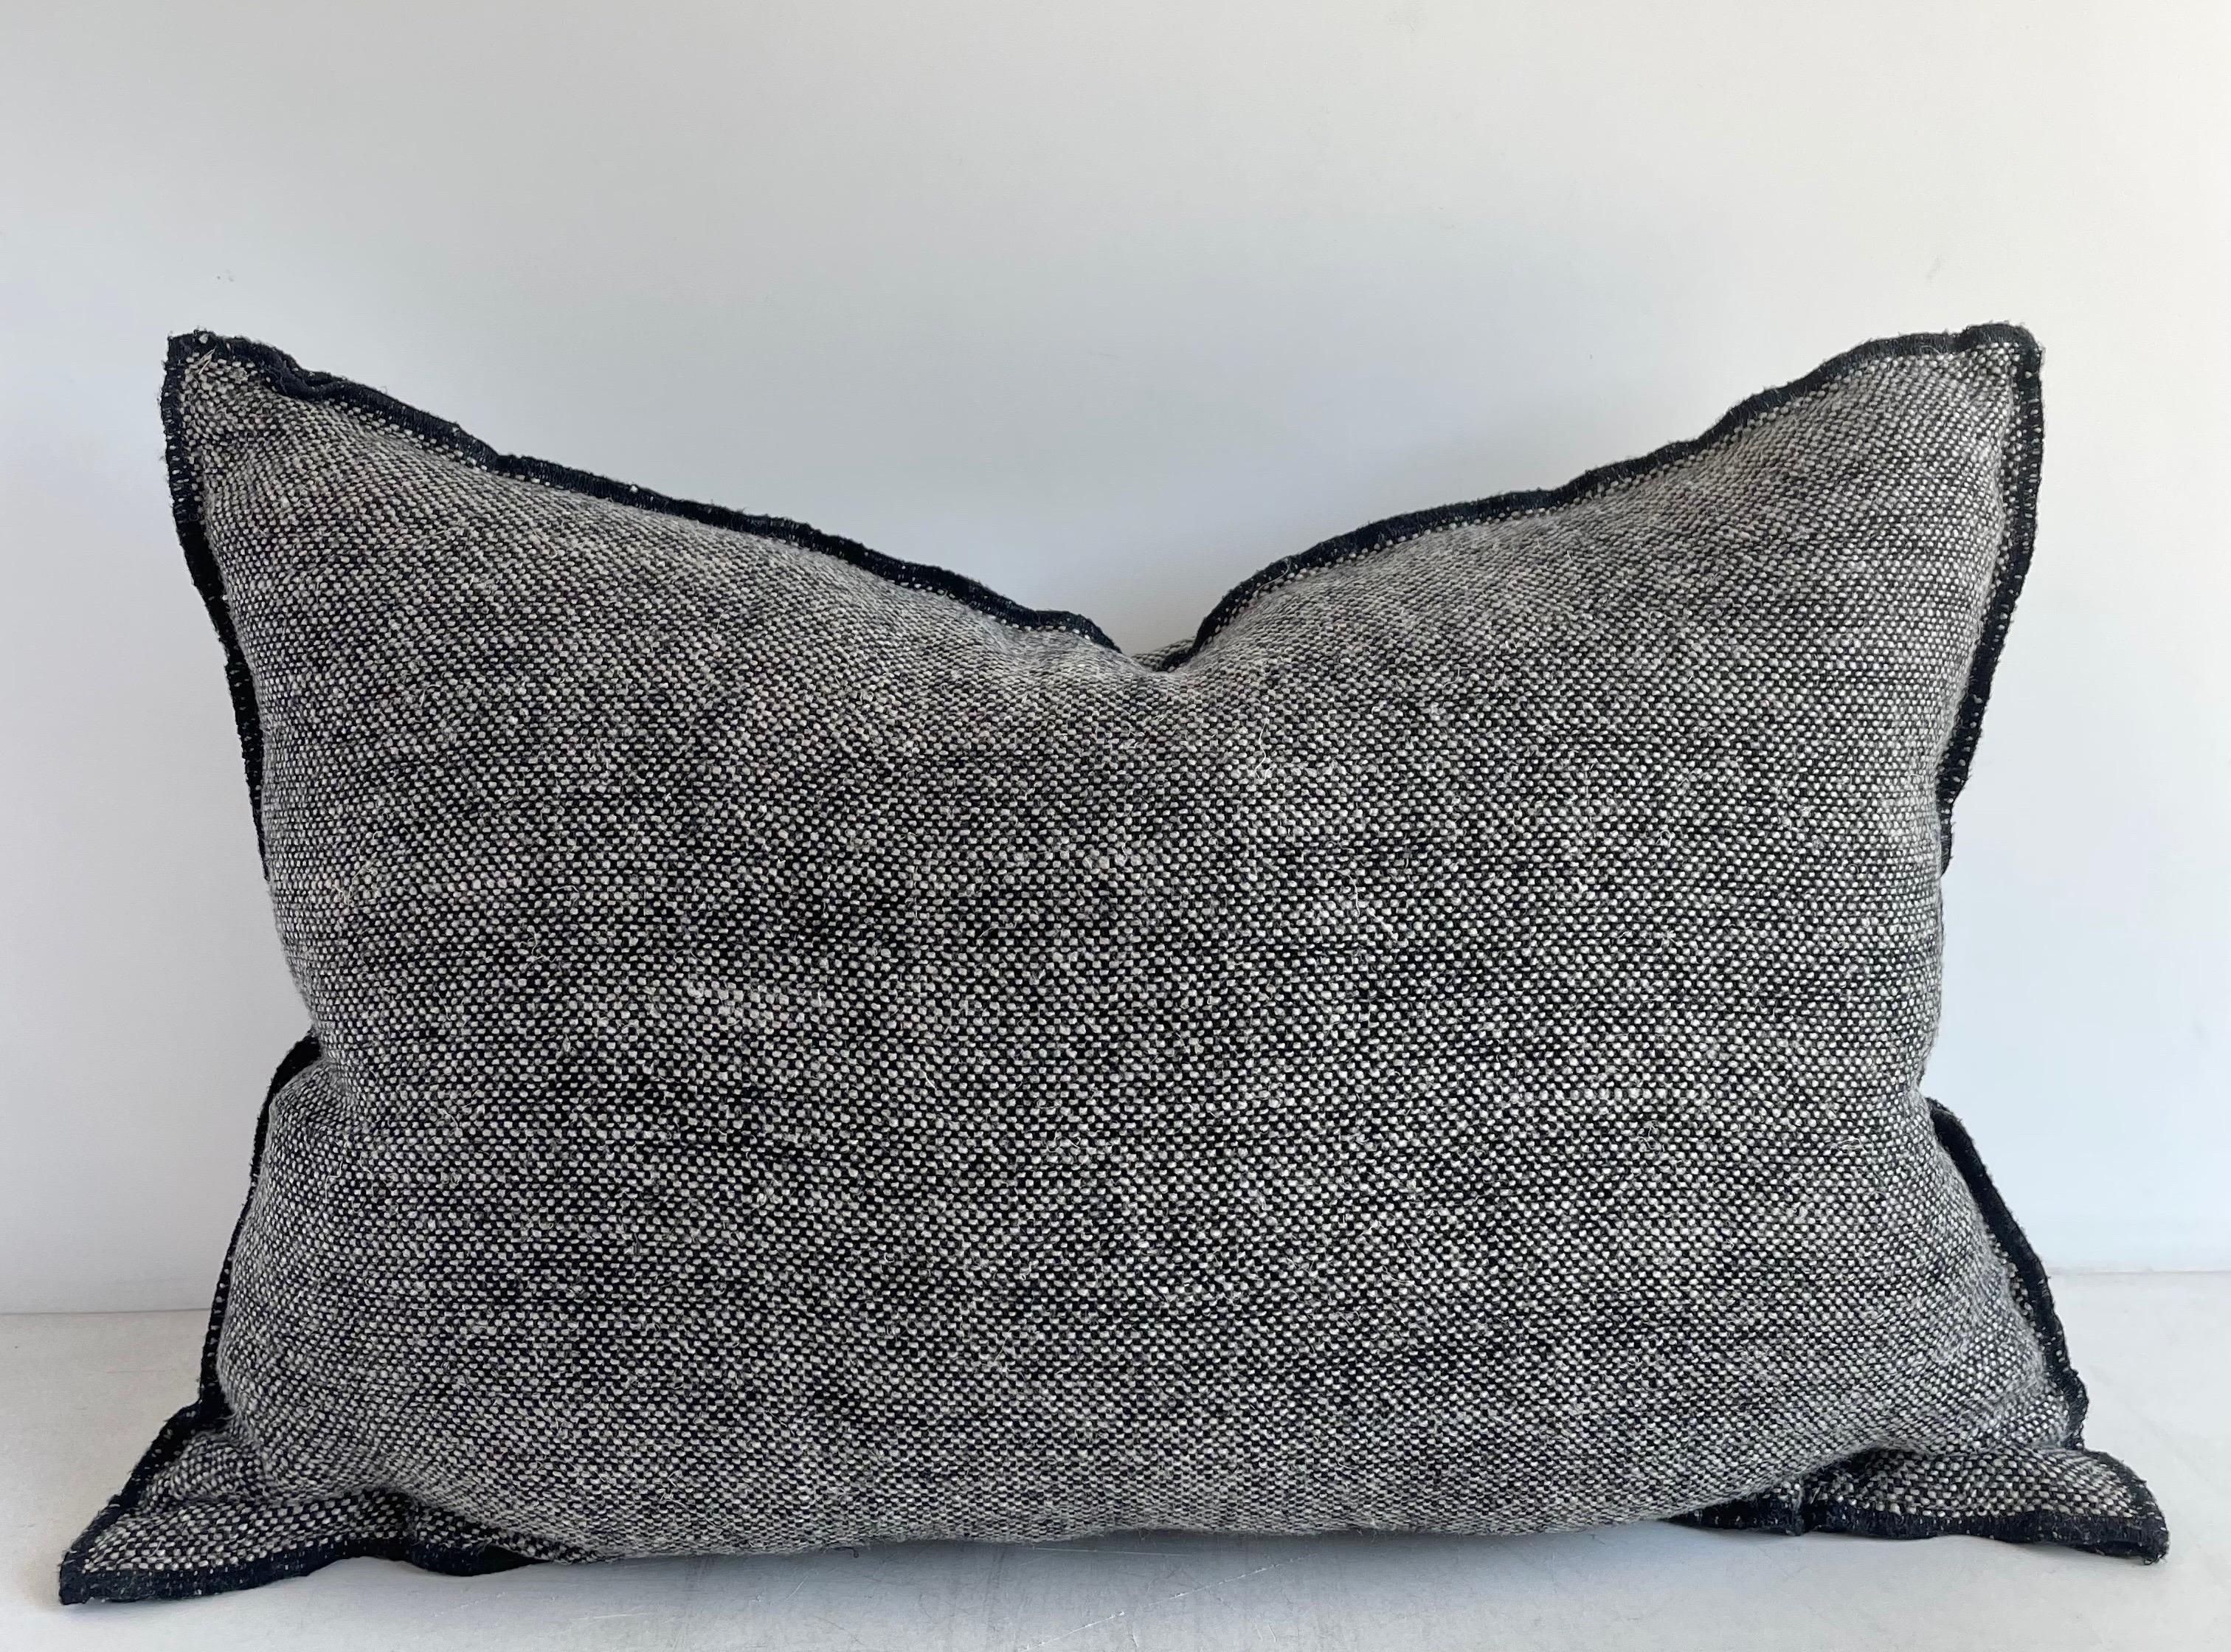 Decorative accent pillow in a thick nubby soft linen.
Size: 16” x 24” when stuffed with insert.
Color: Black and Natural Woven
Decorative Metal buttons at top, or can be used at the bottom, with a decorative stitched edging.
This does not come